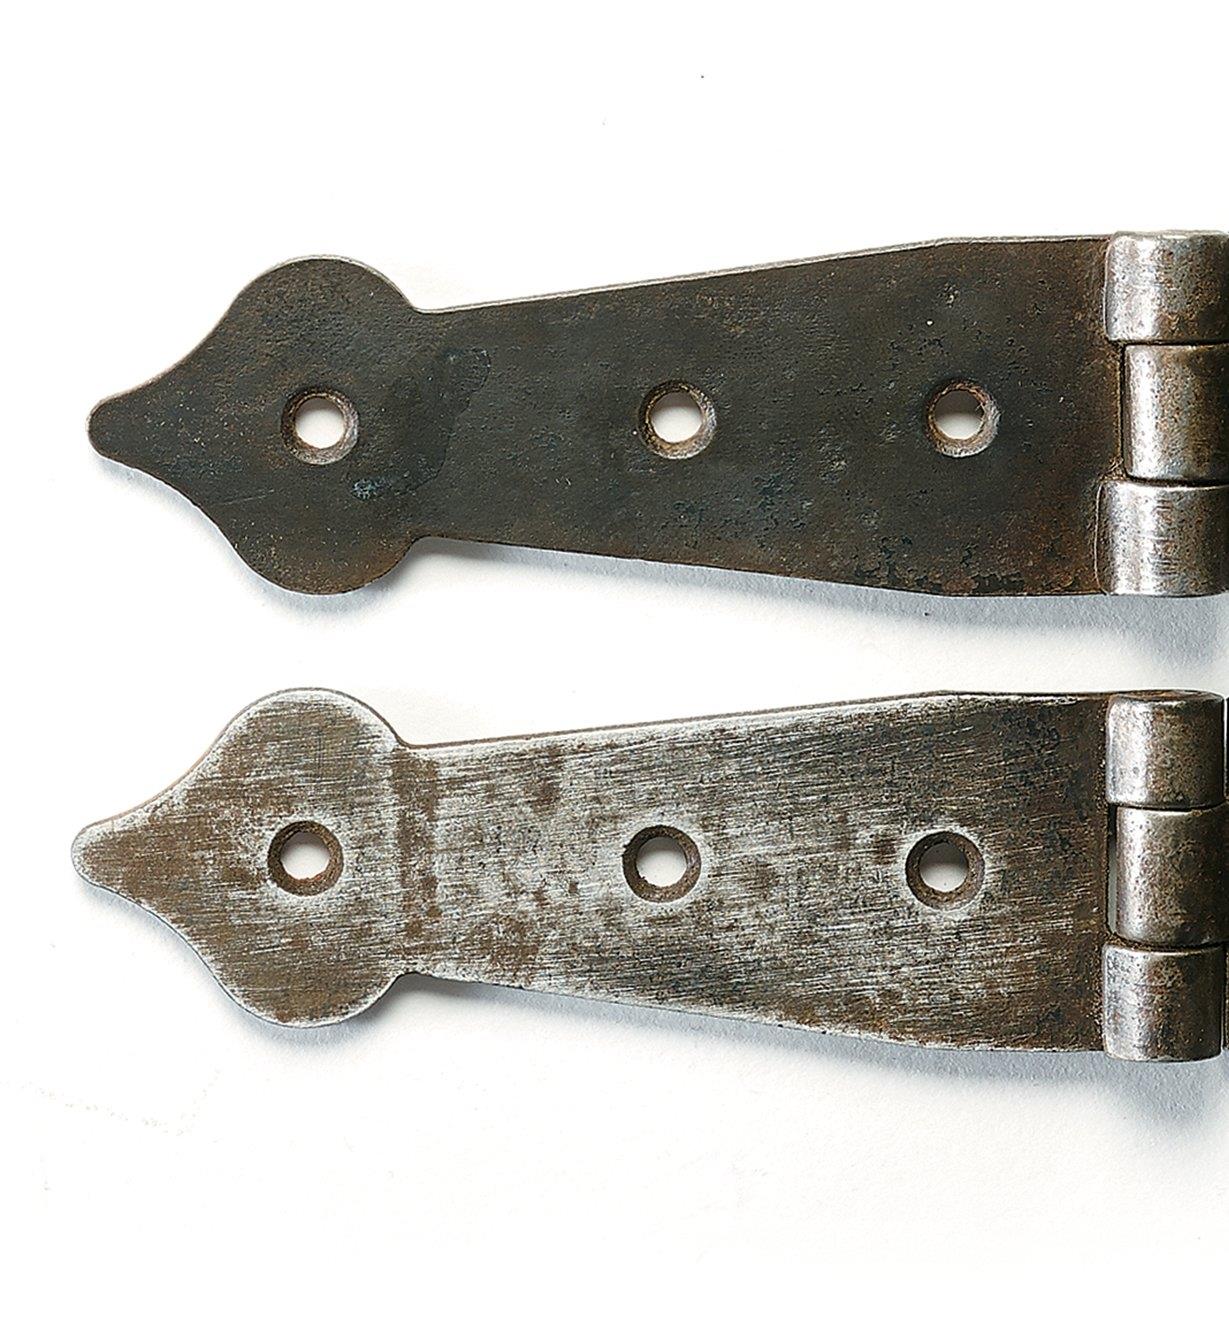 Two metal hinges as examples